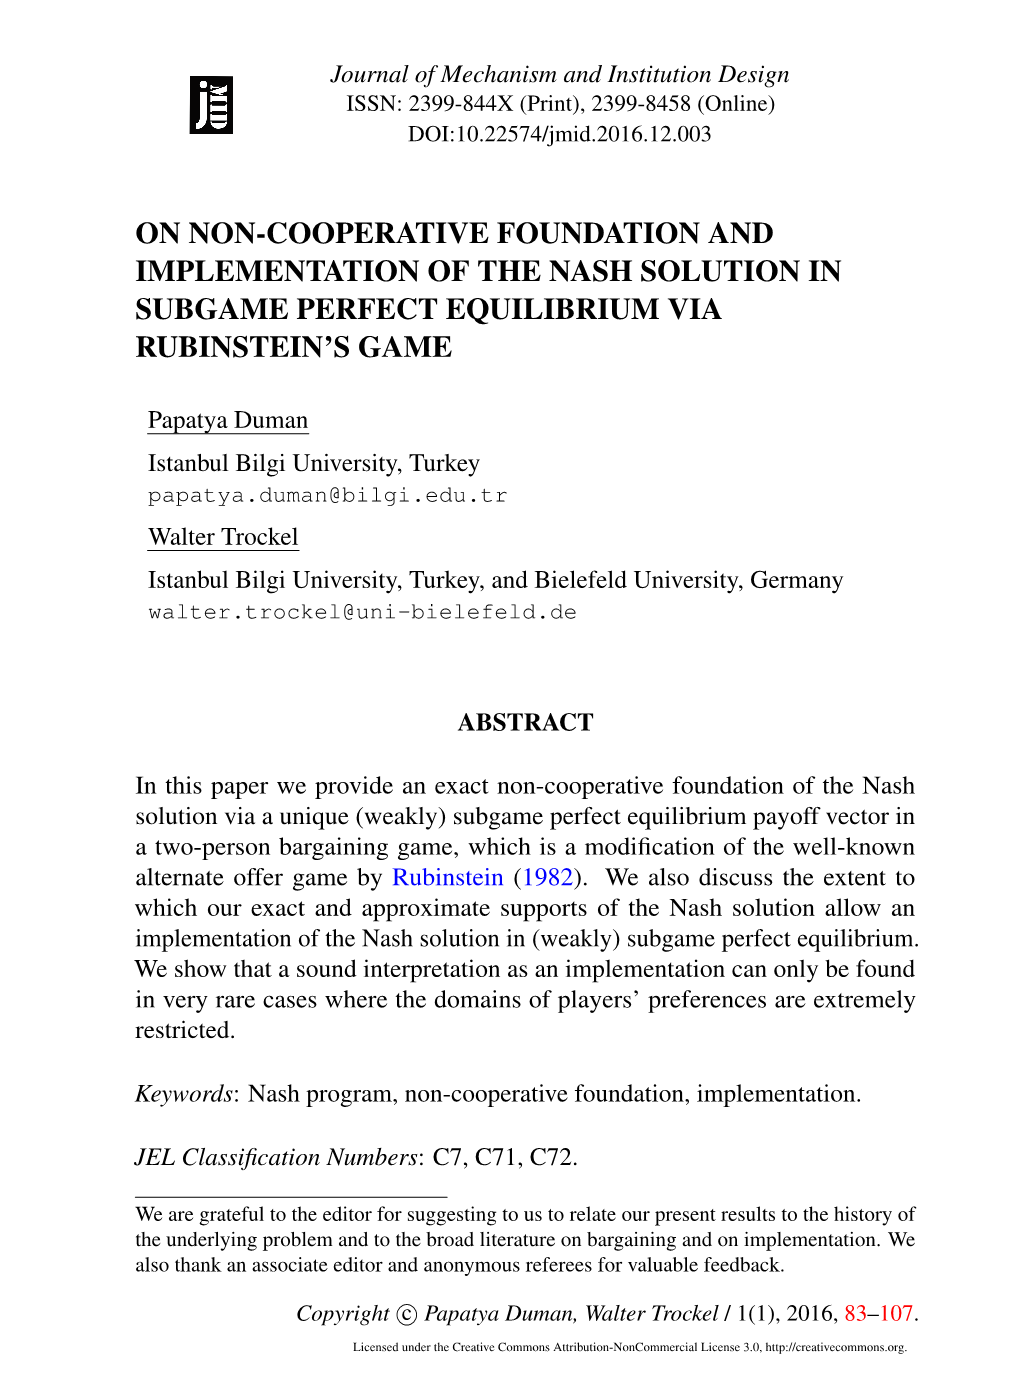 On Non-Cooperative Foundation and Implementation of the Nash Solution in Subgame Perfect Equilibrium Via Rubinstein’S Game